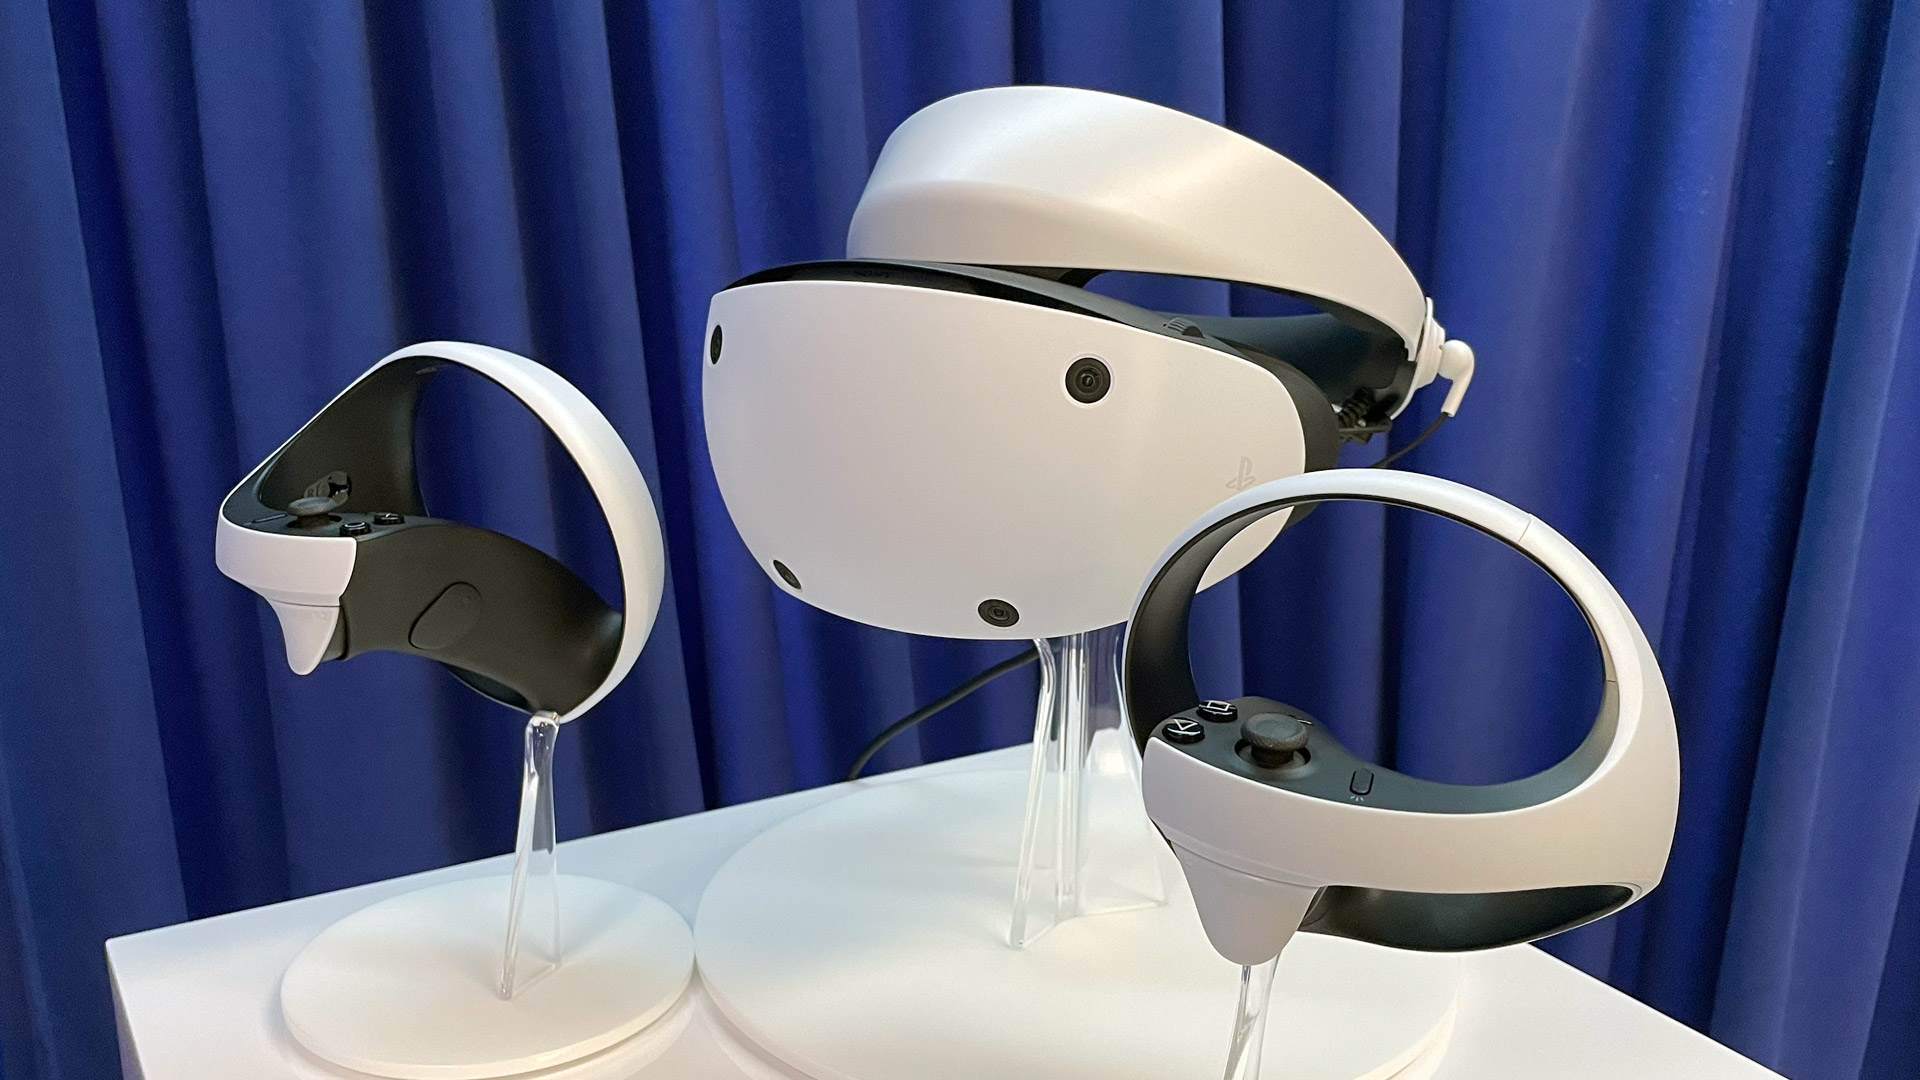 PlayStation VR 2 Release Date Coming in 2023, Sony Confirms